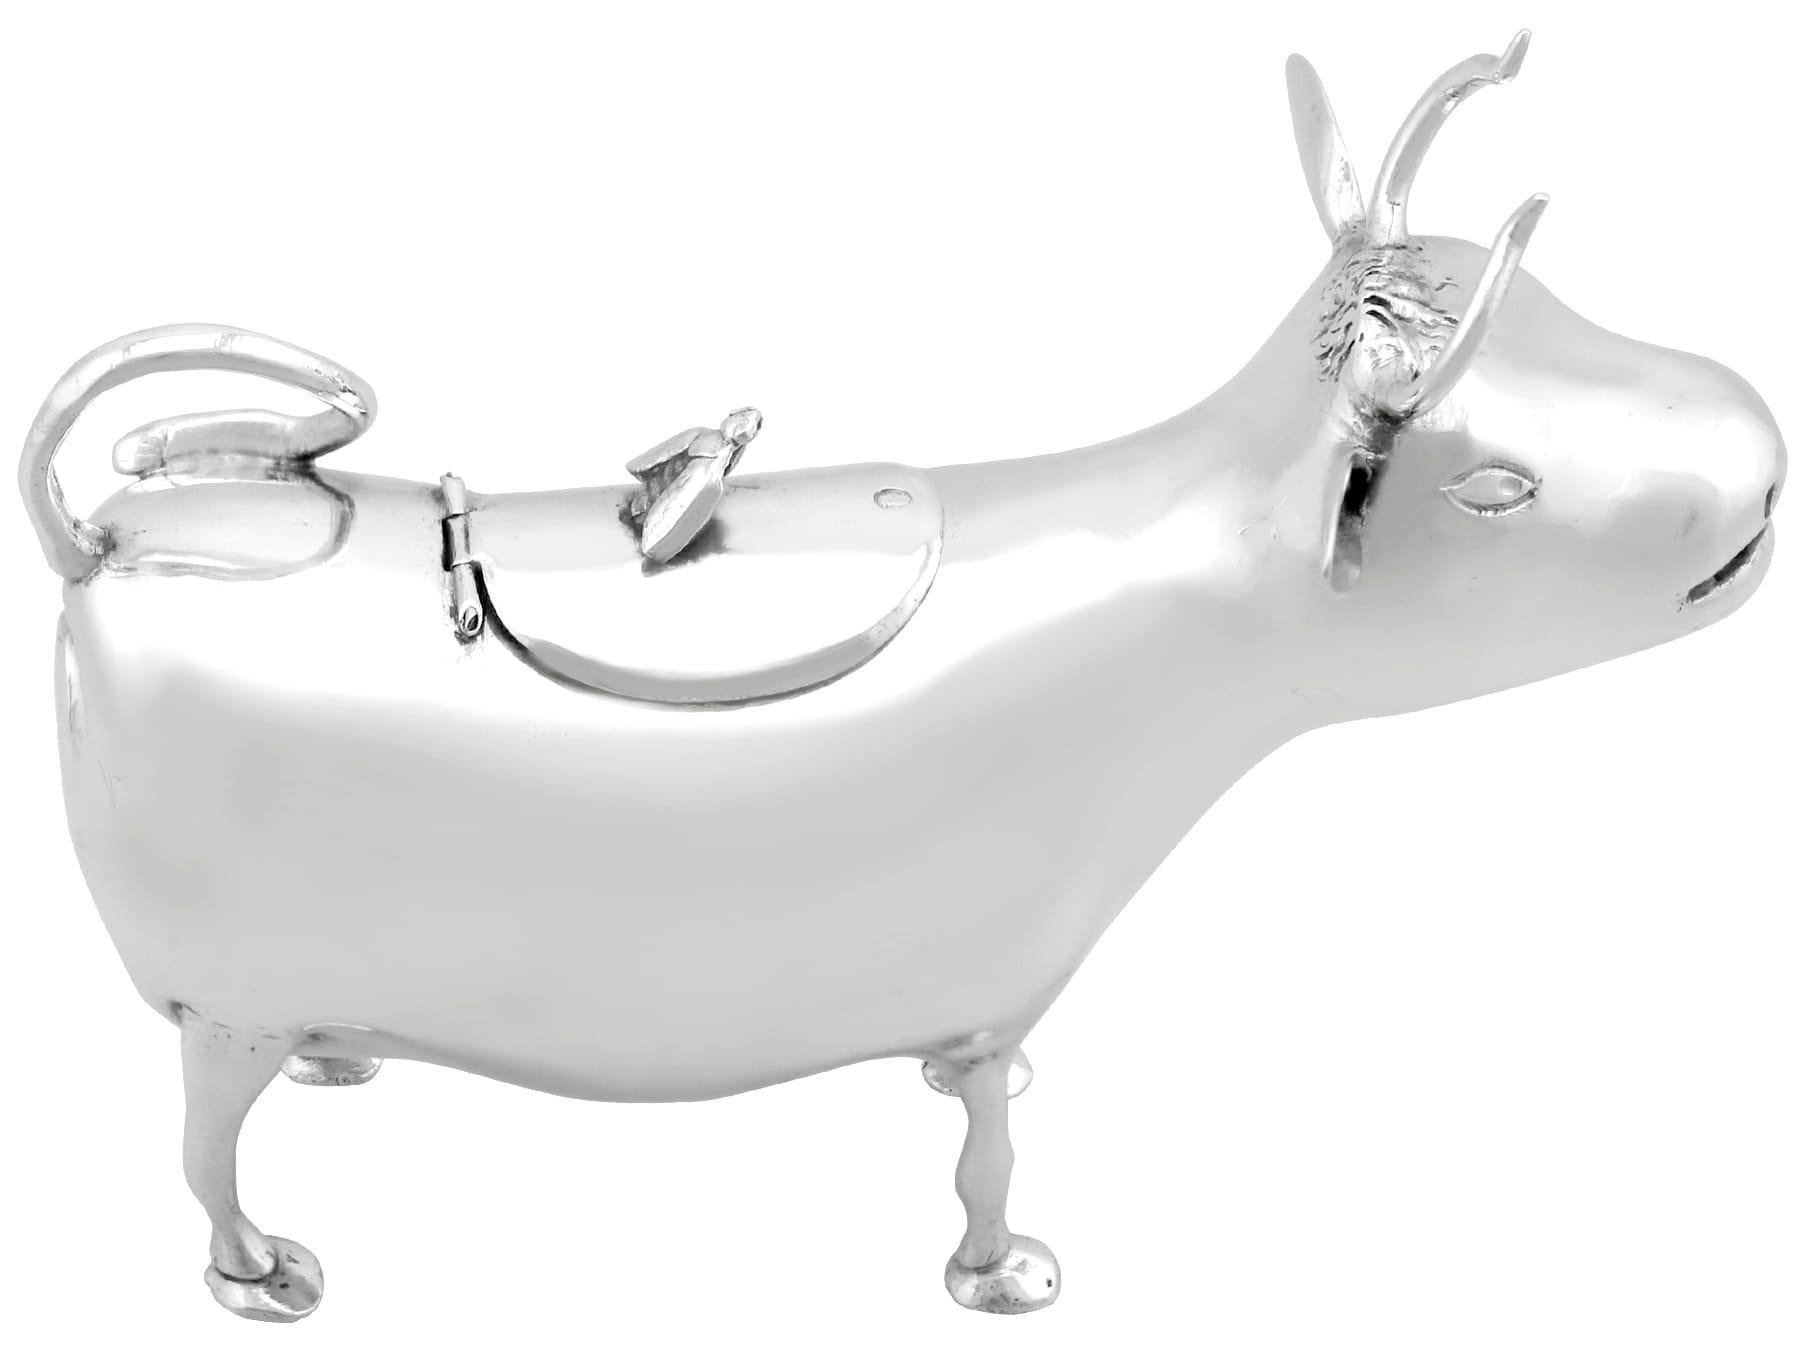 An exceptional, fine and impressive antique Victorian English sterling silver cow creamer; an addition to our 19th Century silverware collection.

This exceptional antique Victorian sterling silver creamer has been realistically modelled in the form